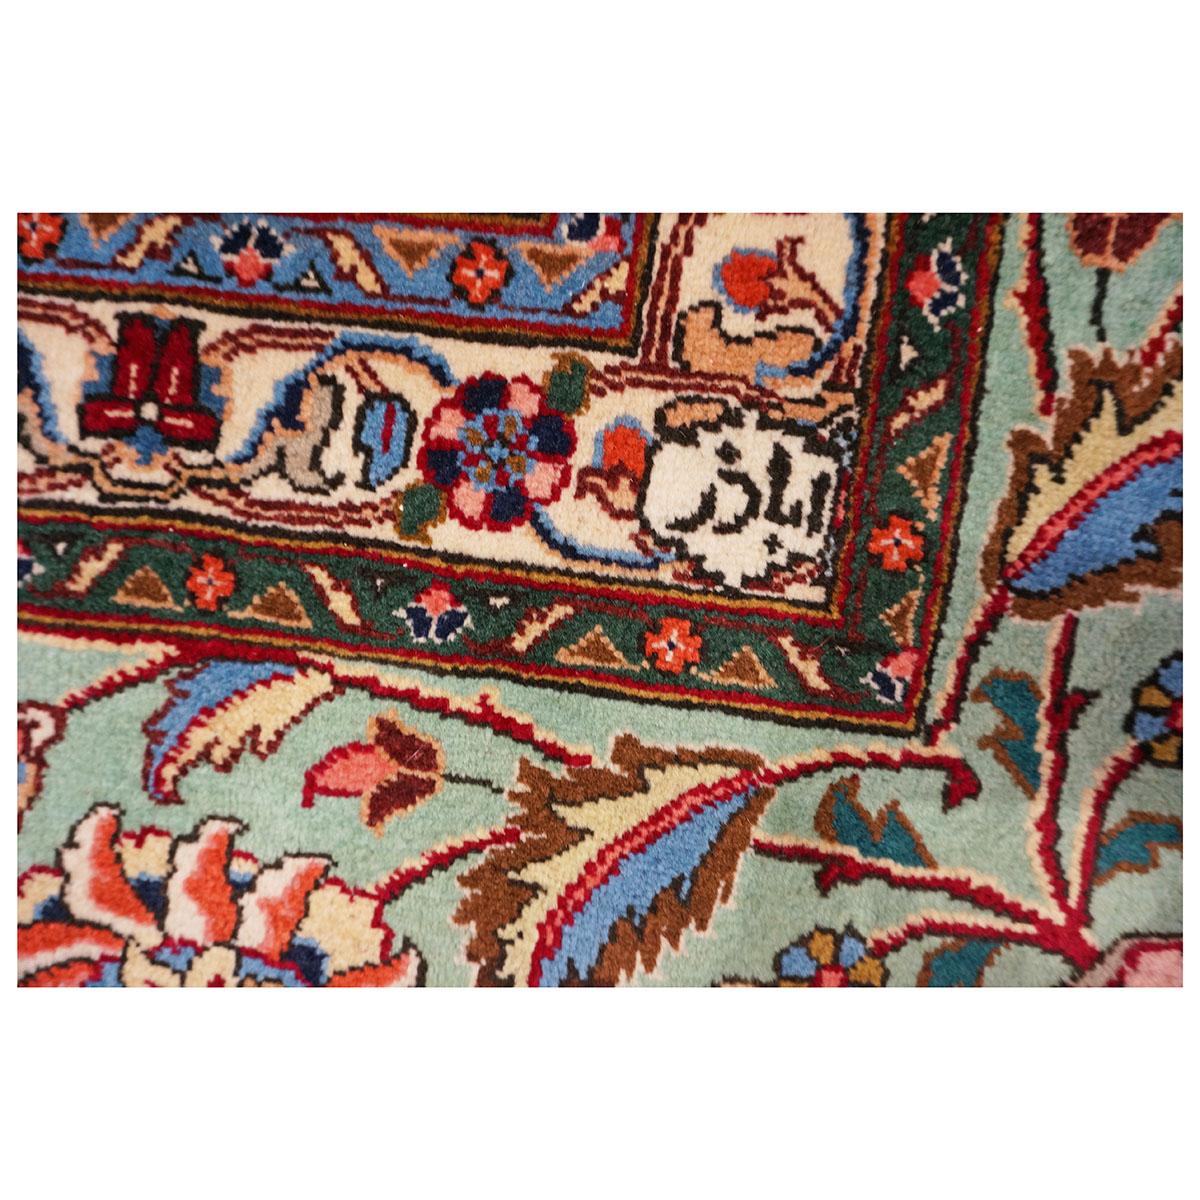 Antique 1940s Persian Tabriz Pahlavi 11x16 Red, Teal, & Ivory Handmade Area Rug For Sale 2